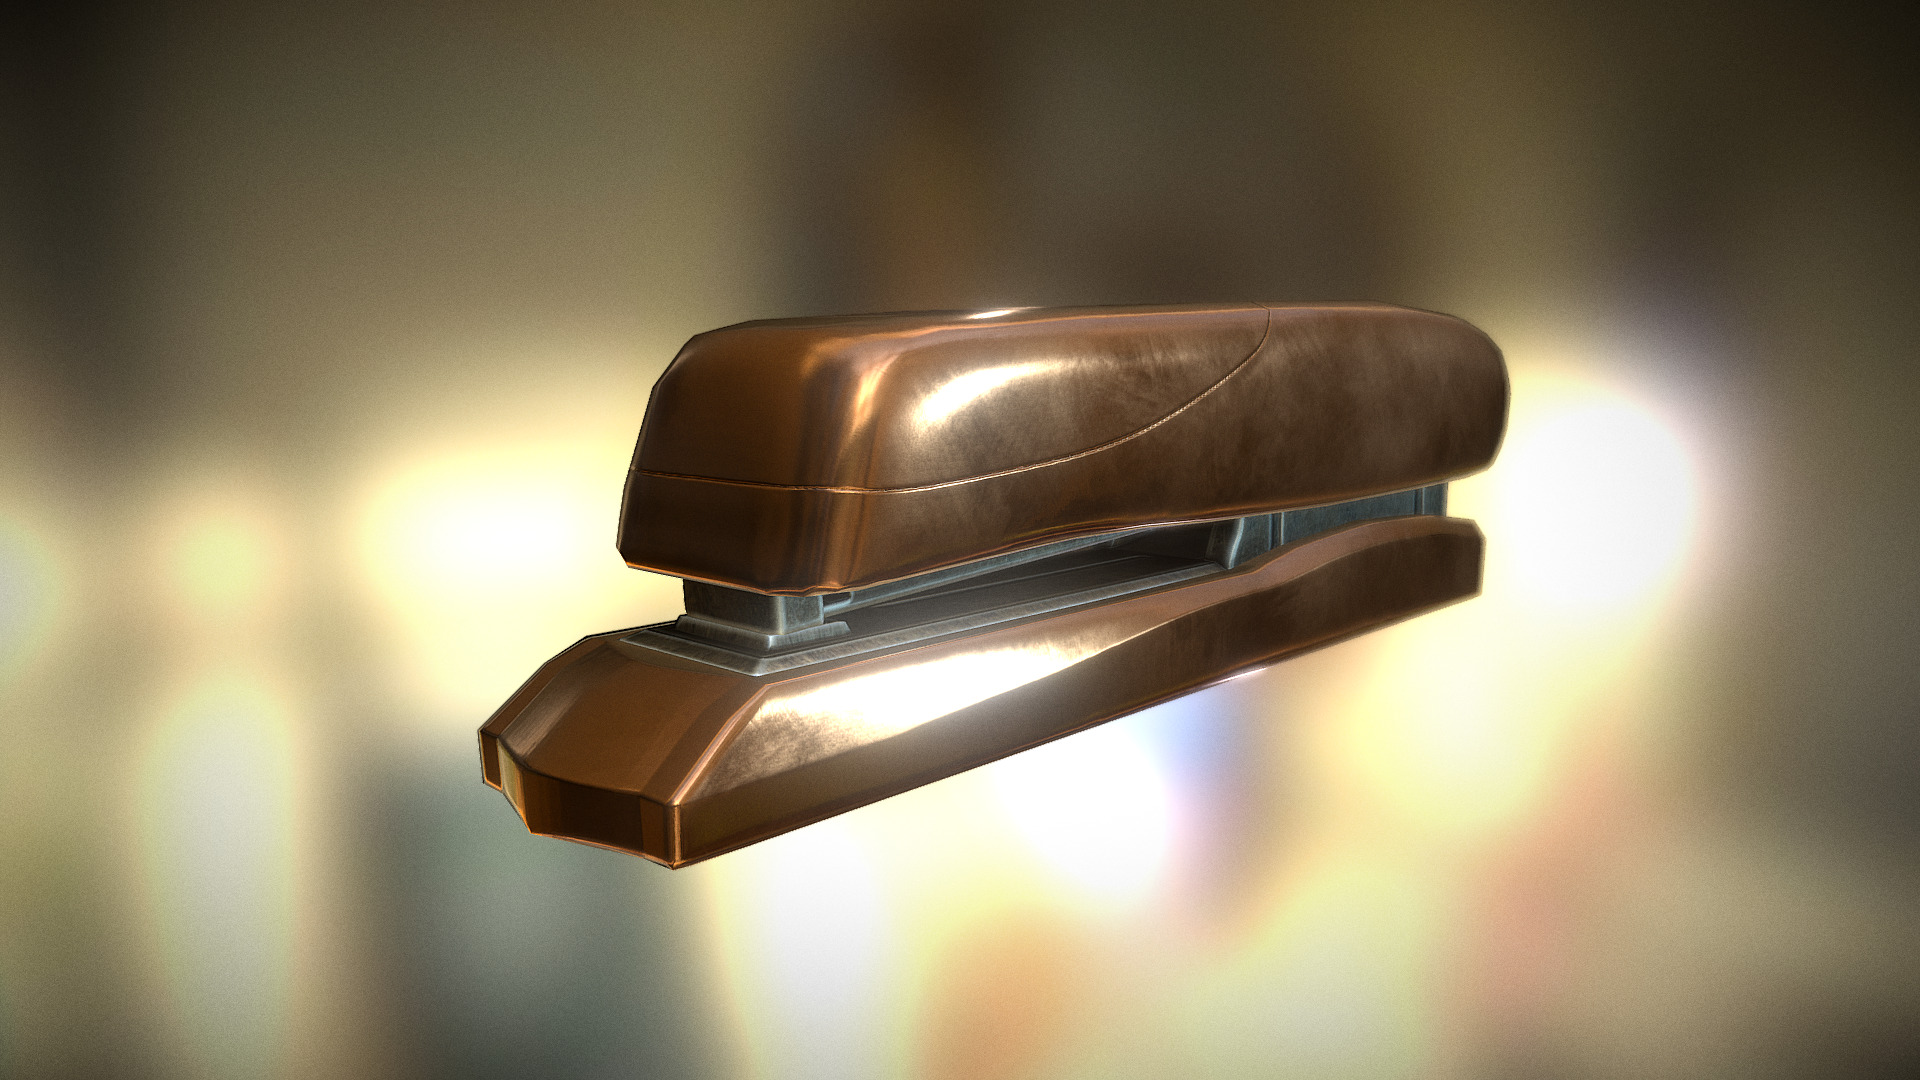 3D model Stapler Copper Version Lowpoly - This is a 3D model of the Stapler Copper Version Lowpoly. The 3D model is about a close-up of a light bulb.